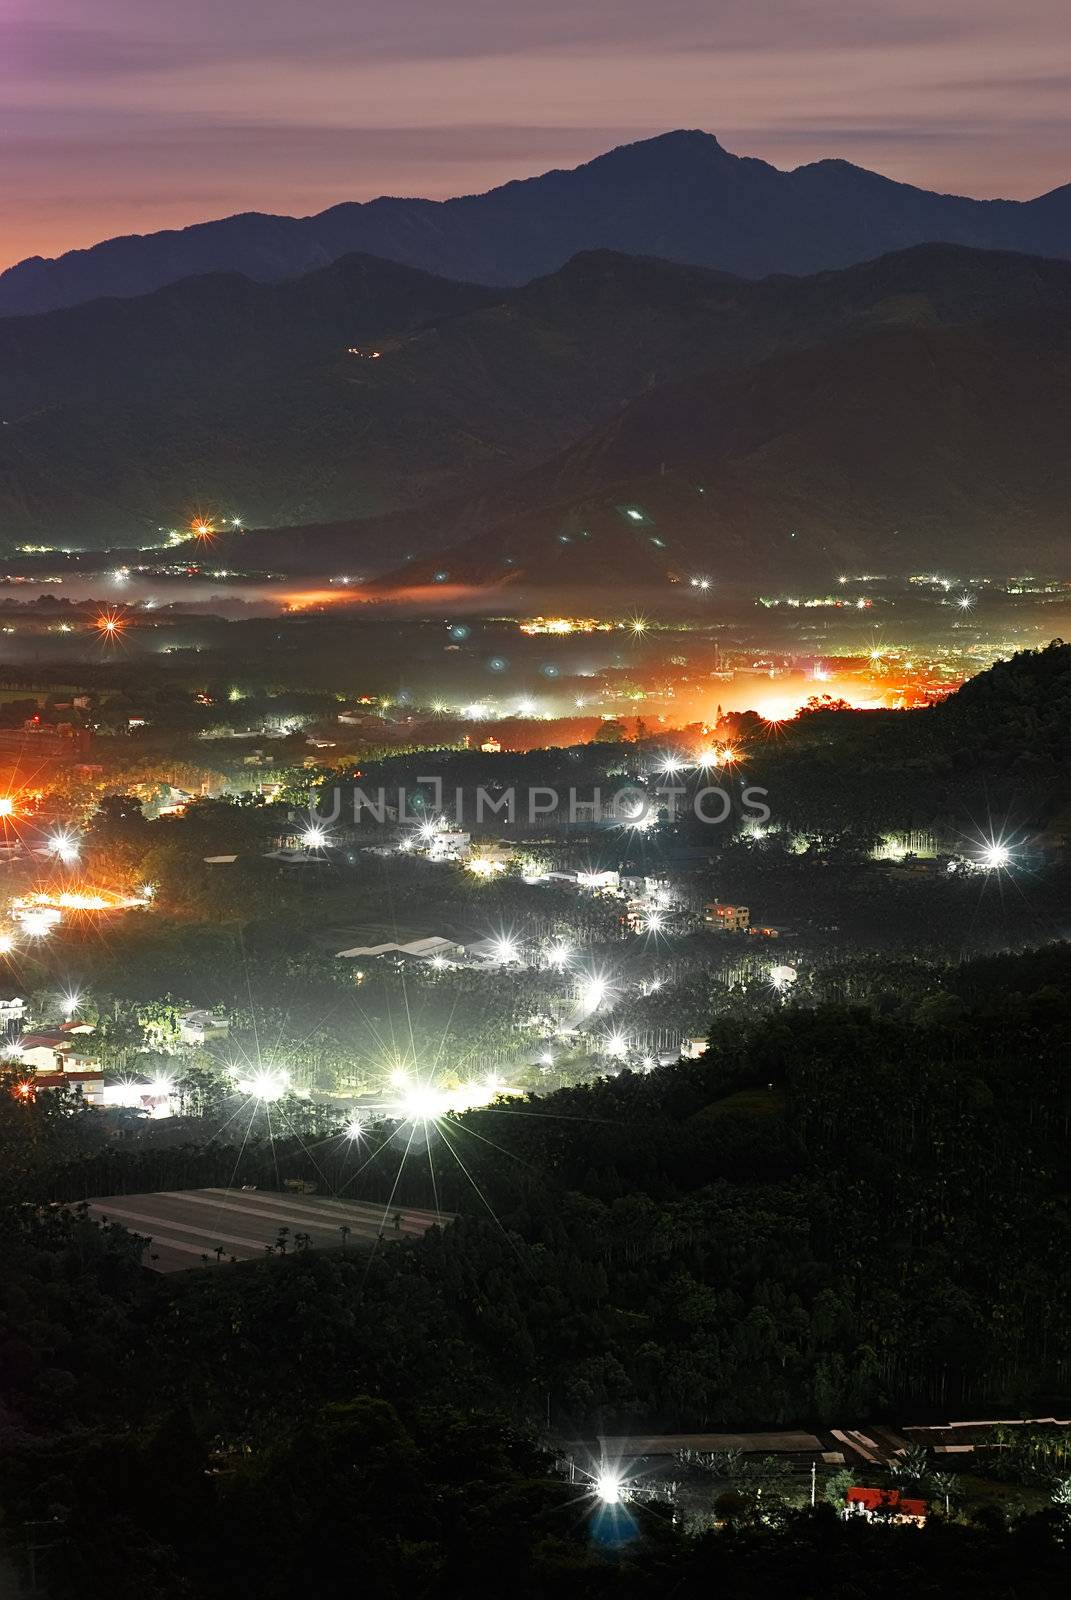 Rural night scene with mist over hill and buildings.